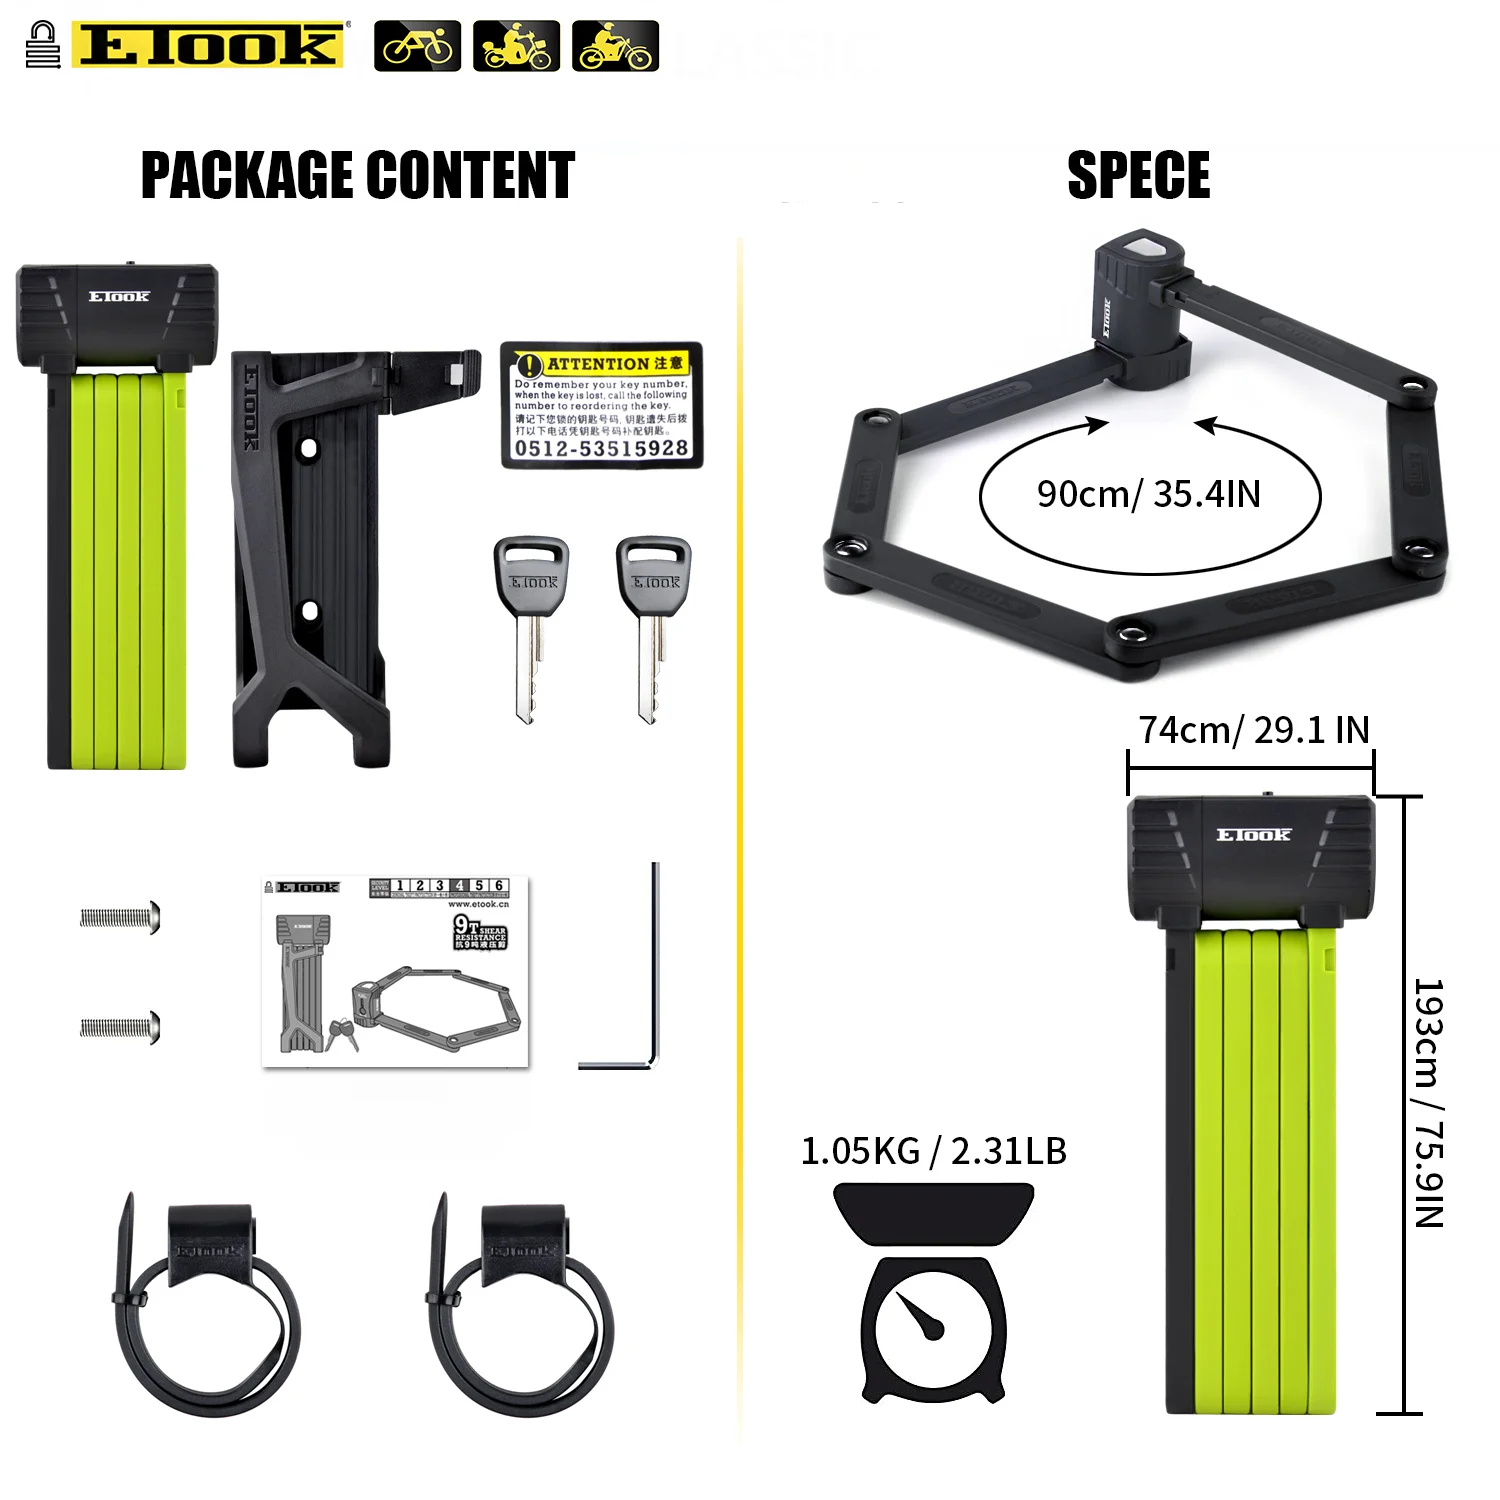 ETOOK Folding Bike Lock Made of Special Hardened Steel Heavy Duty Highest Security Side Taking Patent Design Easy to Use，2 Keys and a Mount Bracket Included,900mm/35.4inch,1052g/2.3lb 